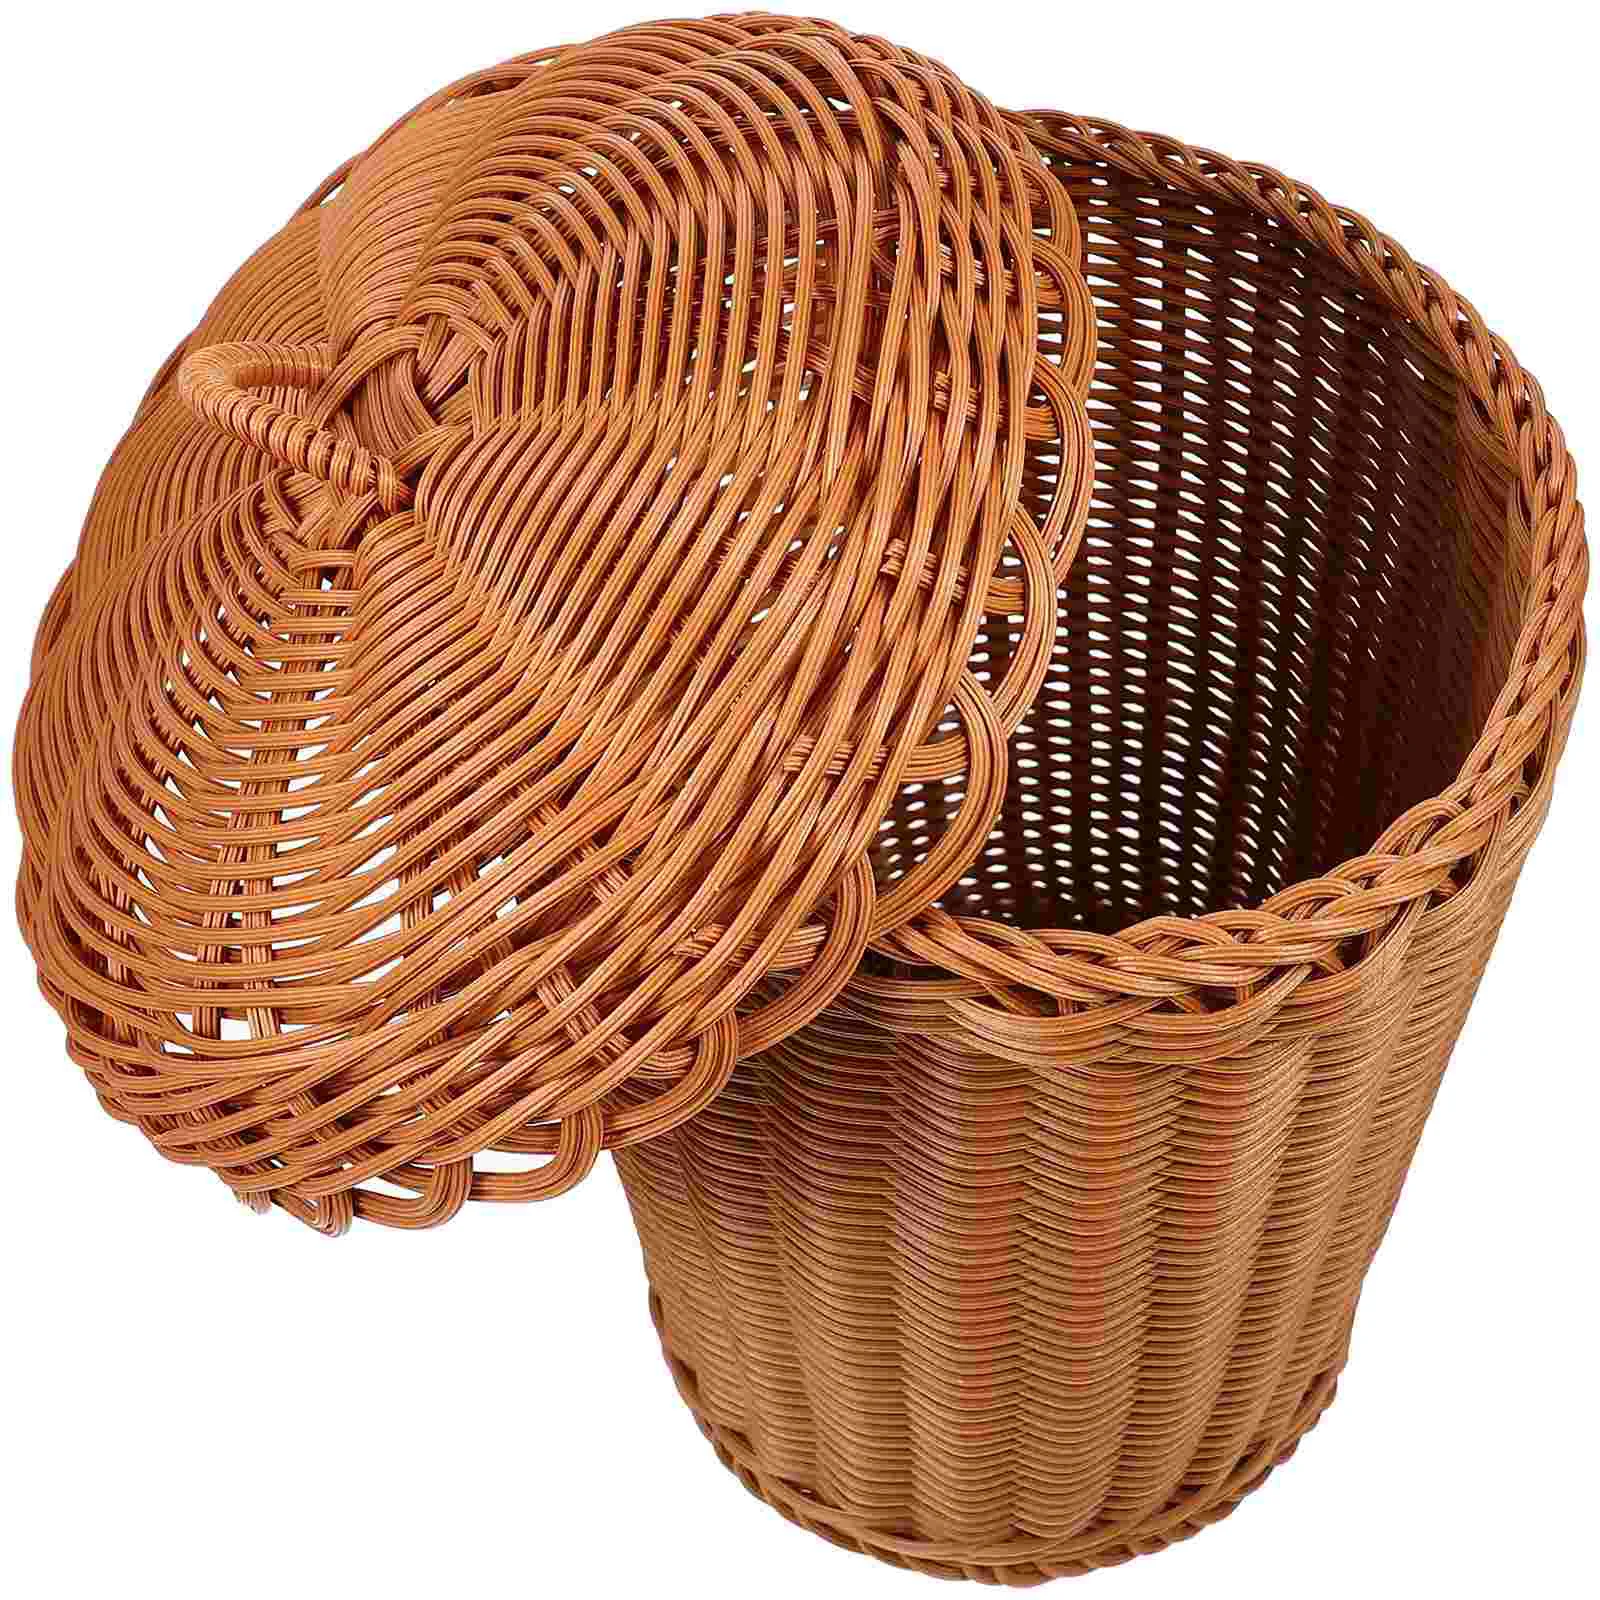 

Flower Pots Woven Trash Can Storage Weaving Basket Sundries Container Box Bedroom Garbage Multipurpose Handmade Office